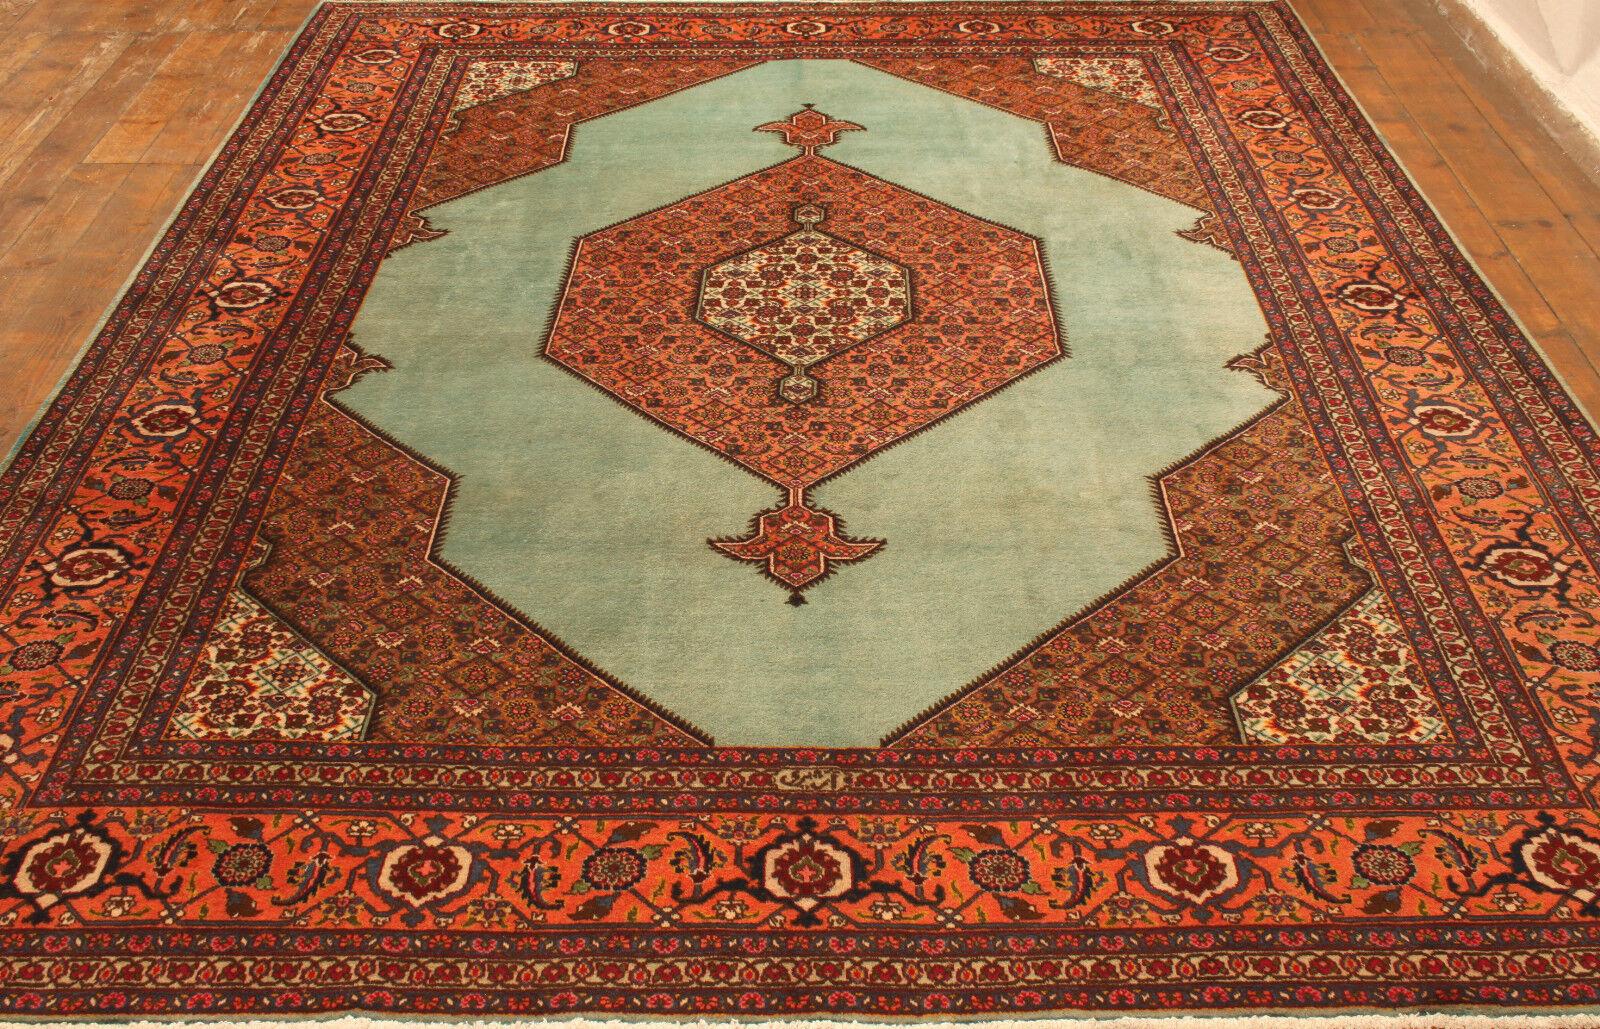 Here’s a product description for the Handmade Vintage Persian Style Tabriz Rug:

Handmade Vintage Persian Style Tabriz Rug (9.6’ x 13.2’ / 293cm x 404cm)

Immerse yourself in the intricate beauty of our Handmade Vintage Persian Style Tabriz Rug.